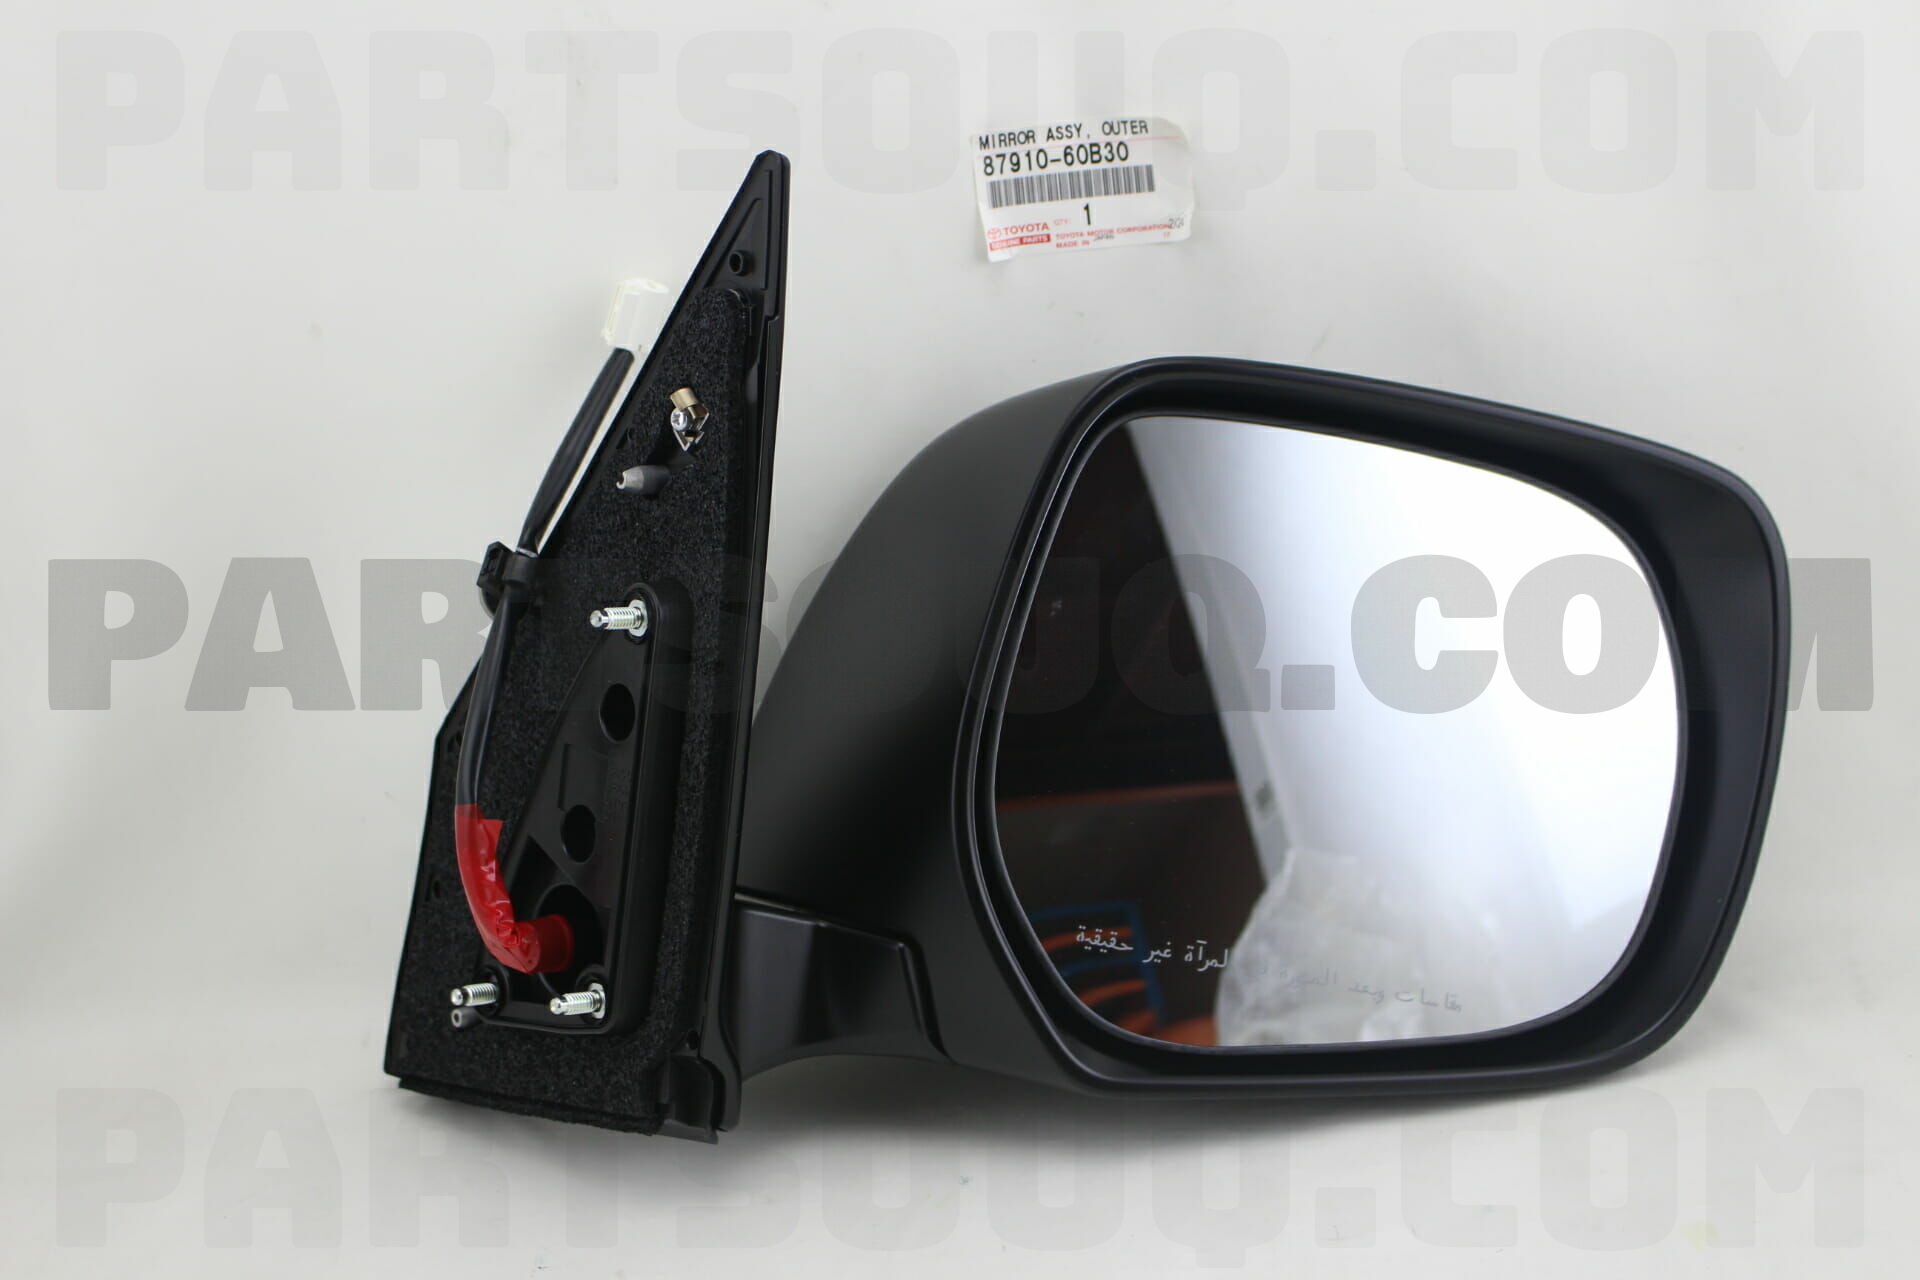 MIRROR ASSY, OUTER REAR VIEW, RH 8791060B30 | Toyota Parts | PartSouq